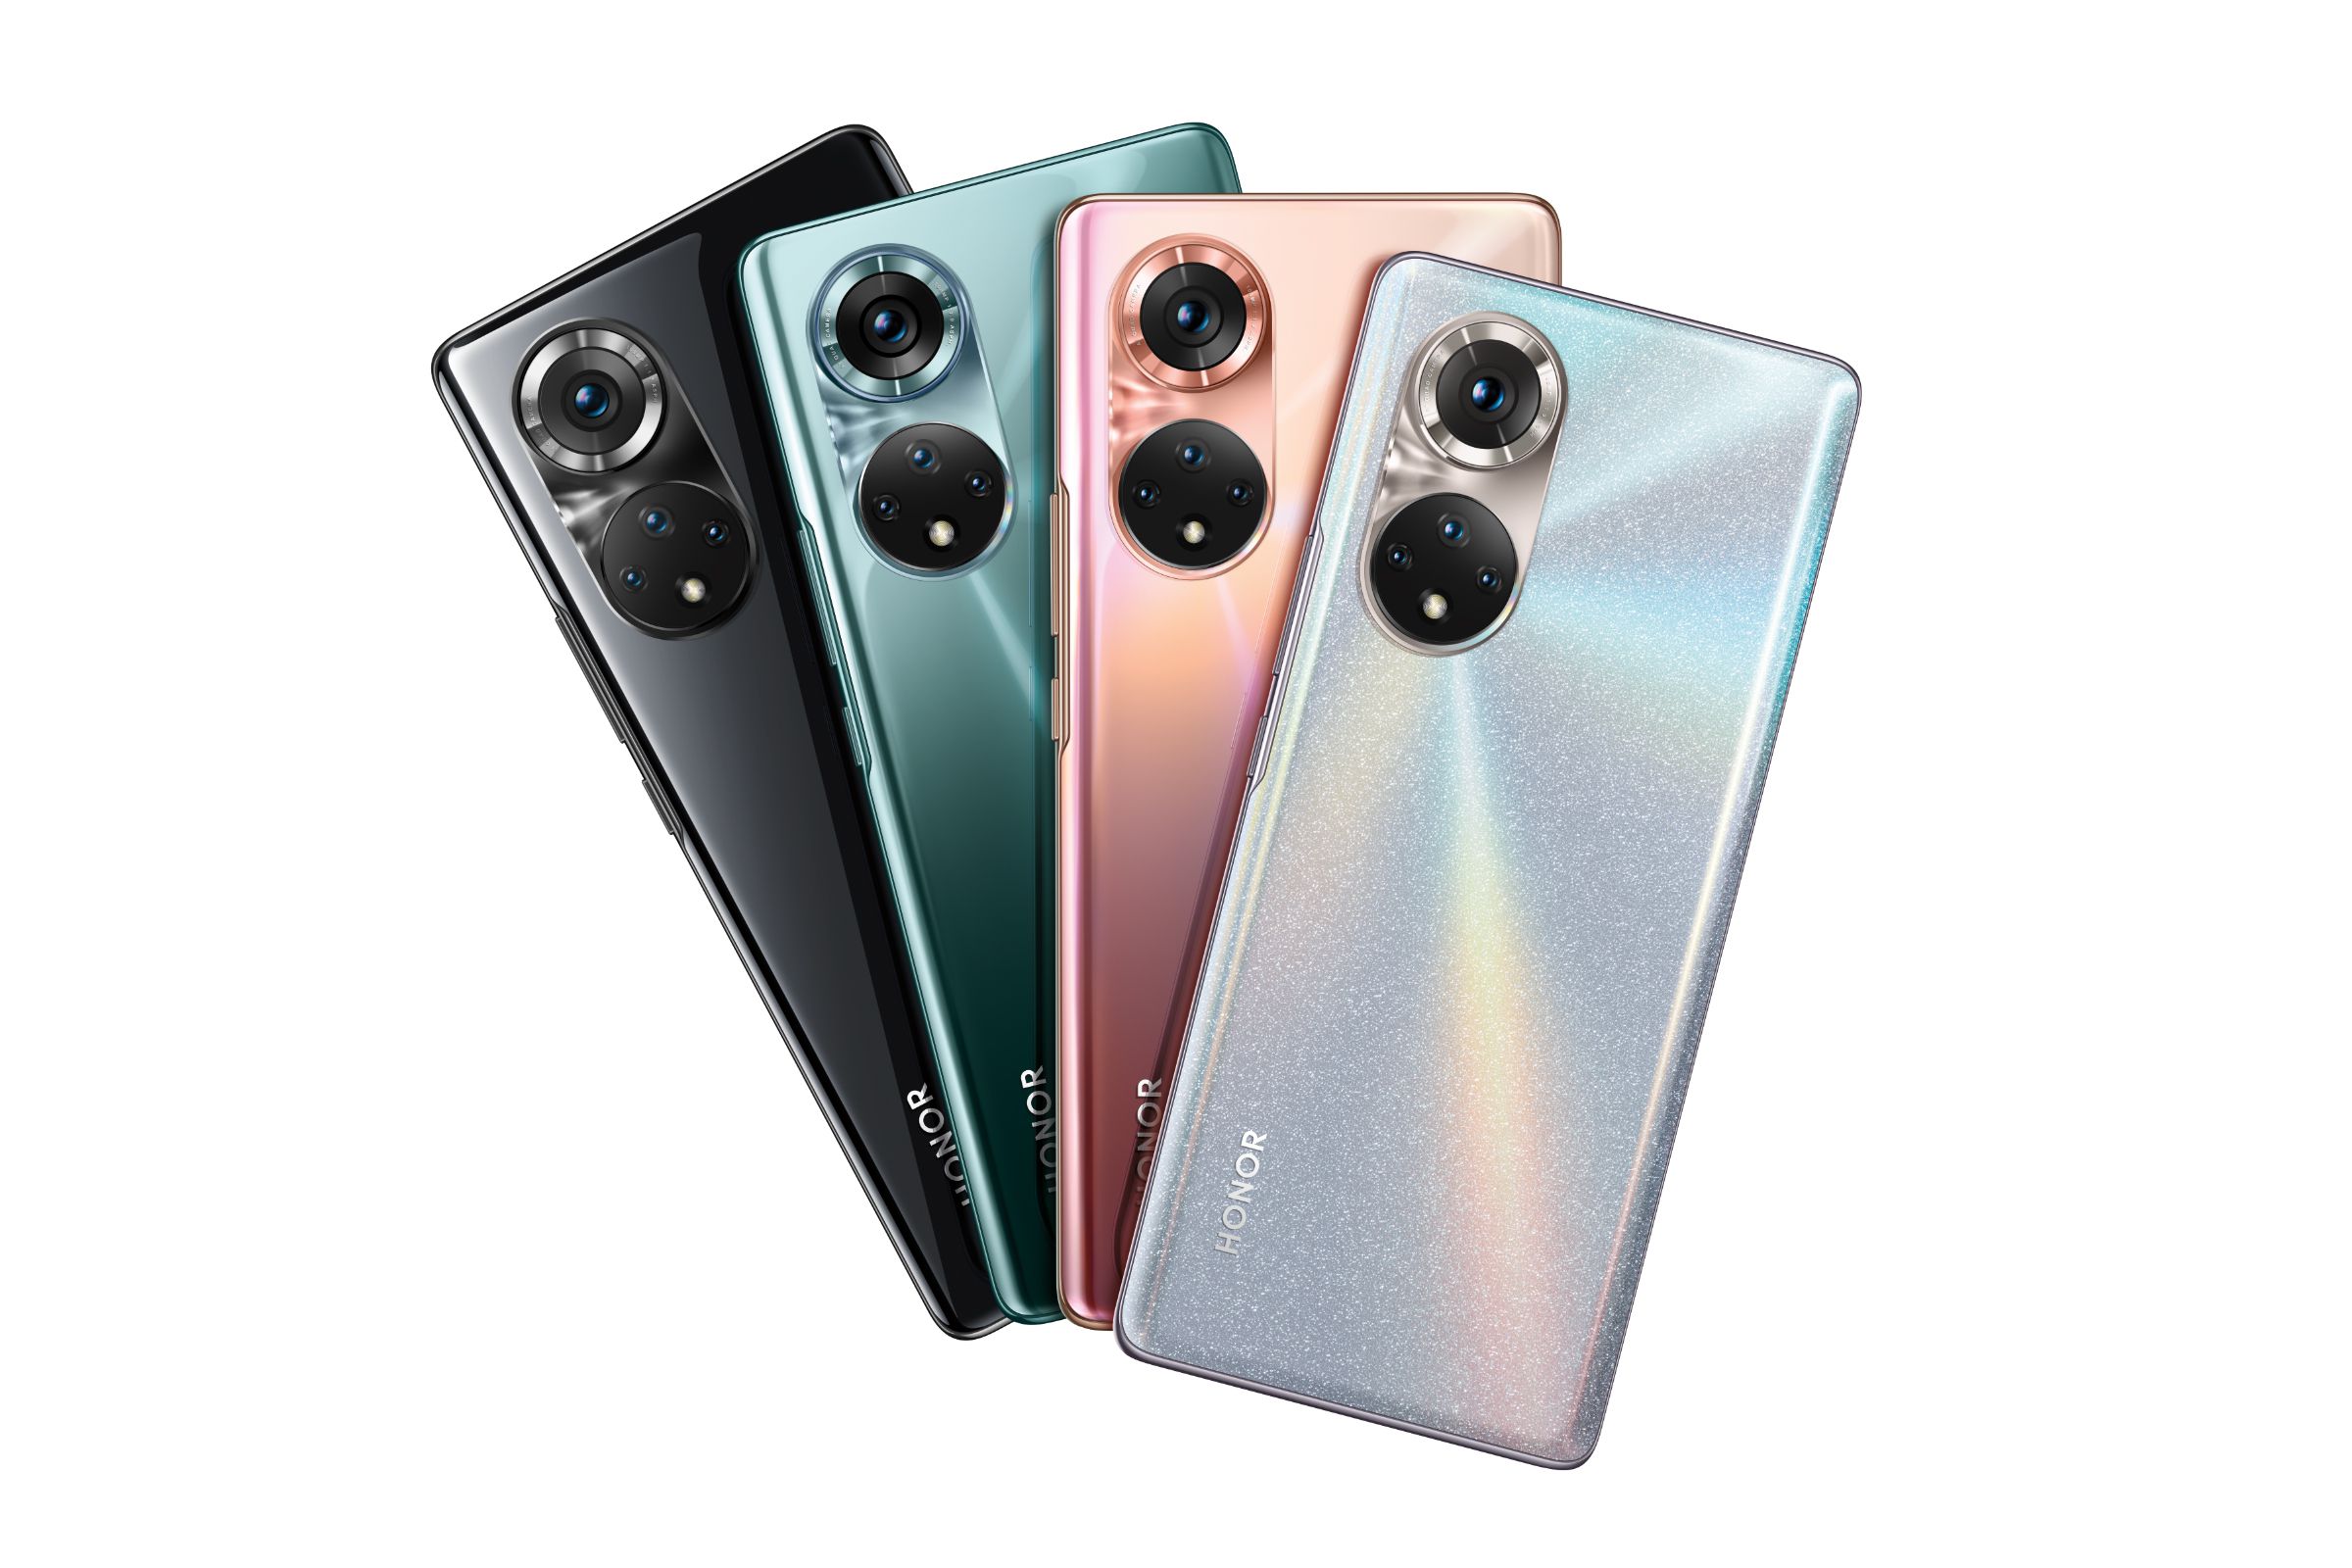 The Honor 50 in silver, copper, green, and black.